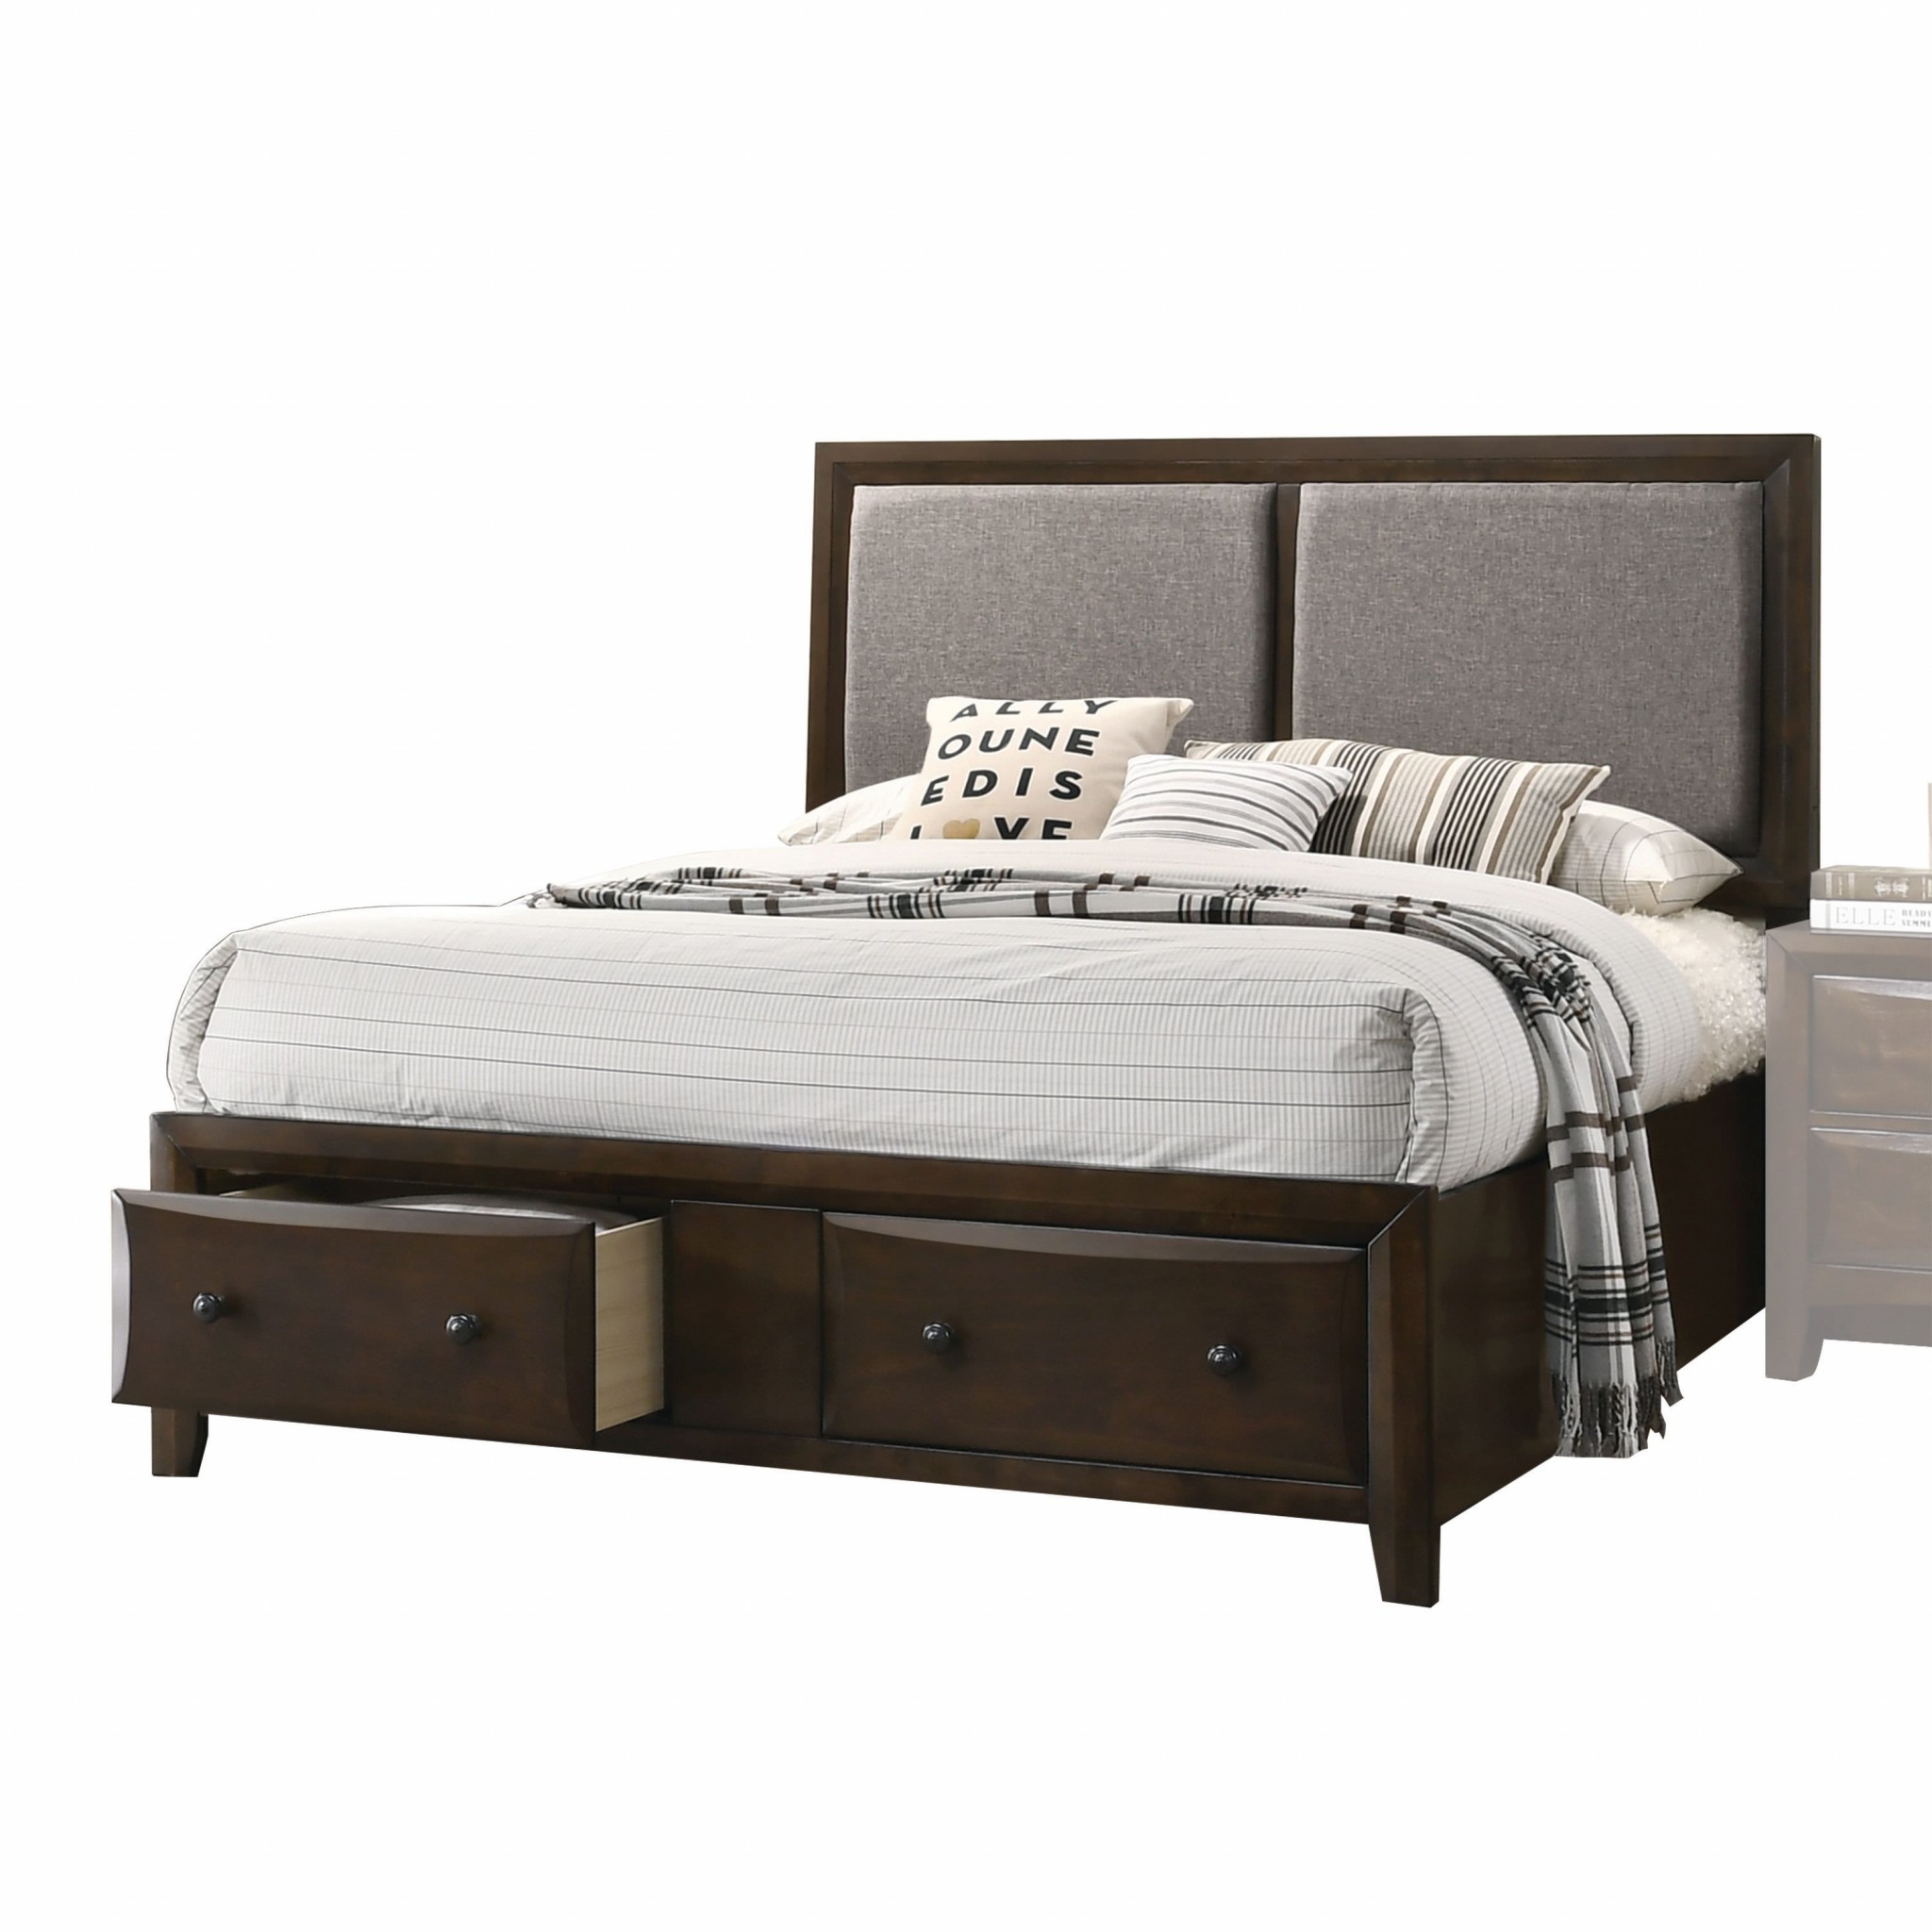 80" X 83" X 54" Fabric Walnut Wood Upholstered HB King Bed